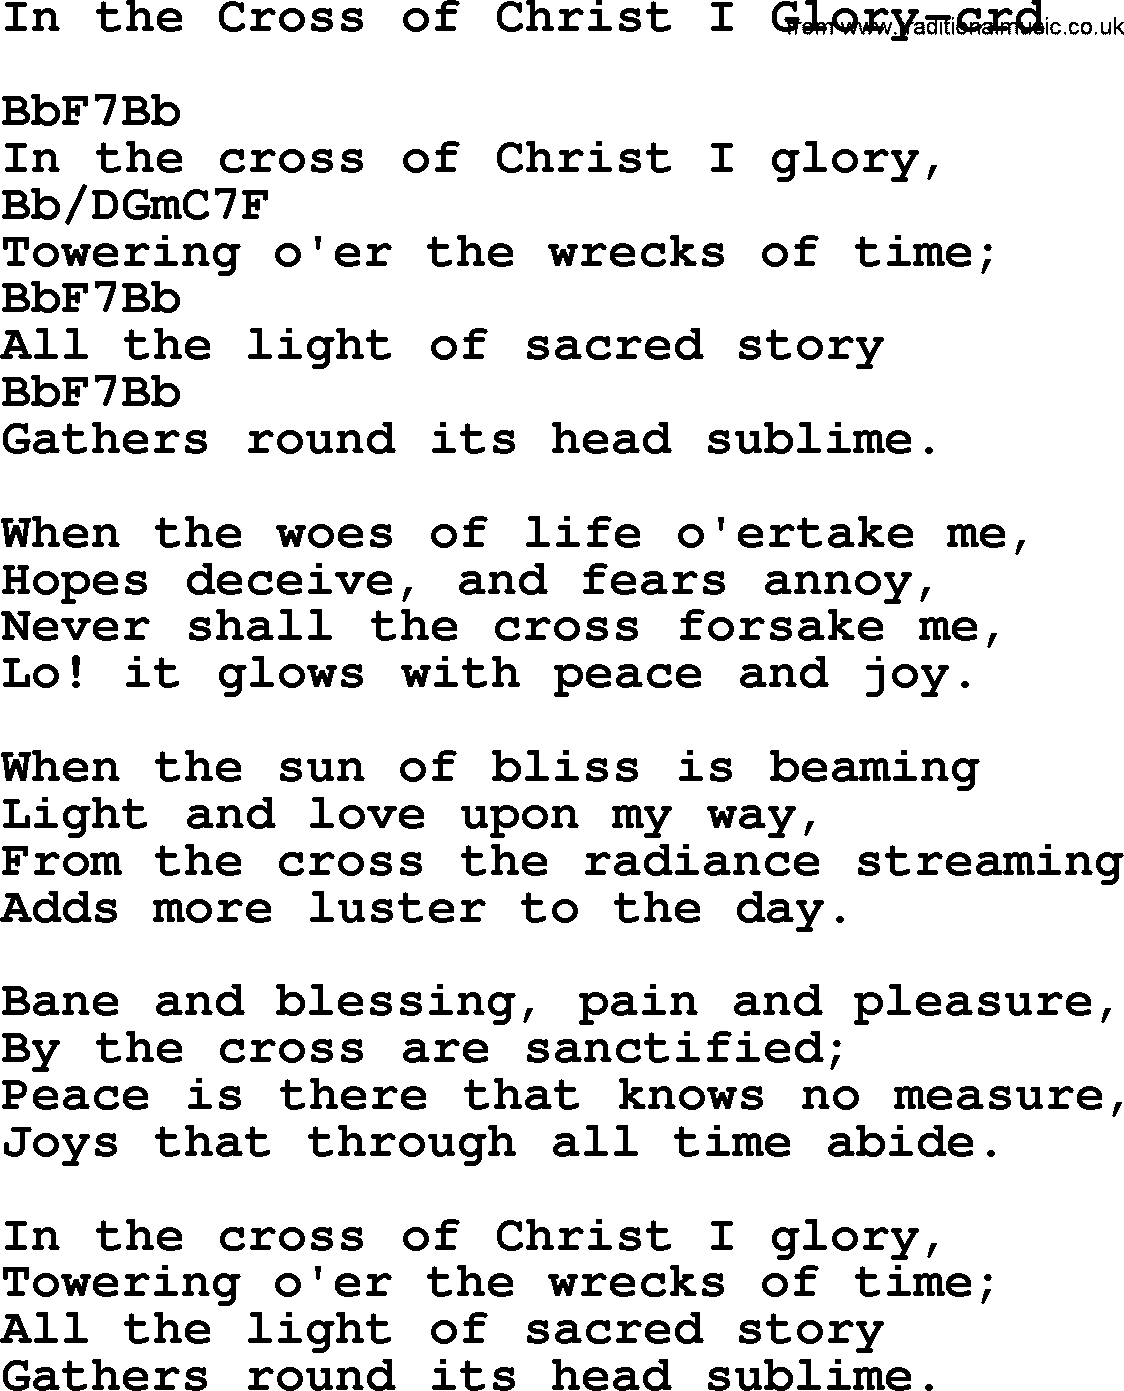 Top 500 Hymn: In The Cross Of Christ I Glory, lyrics and chords